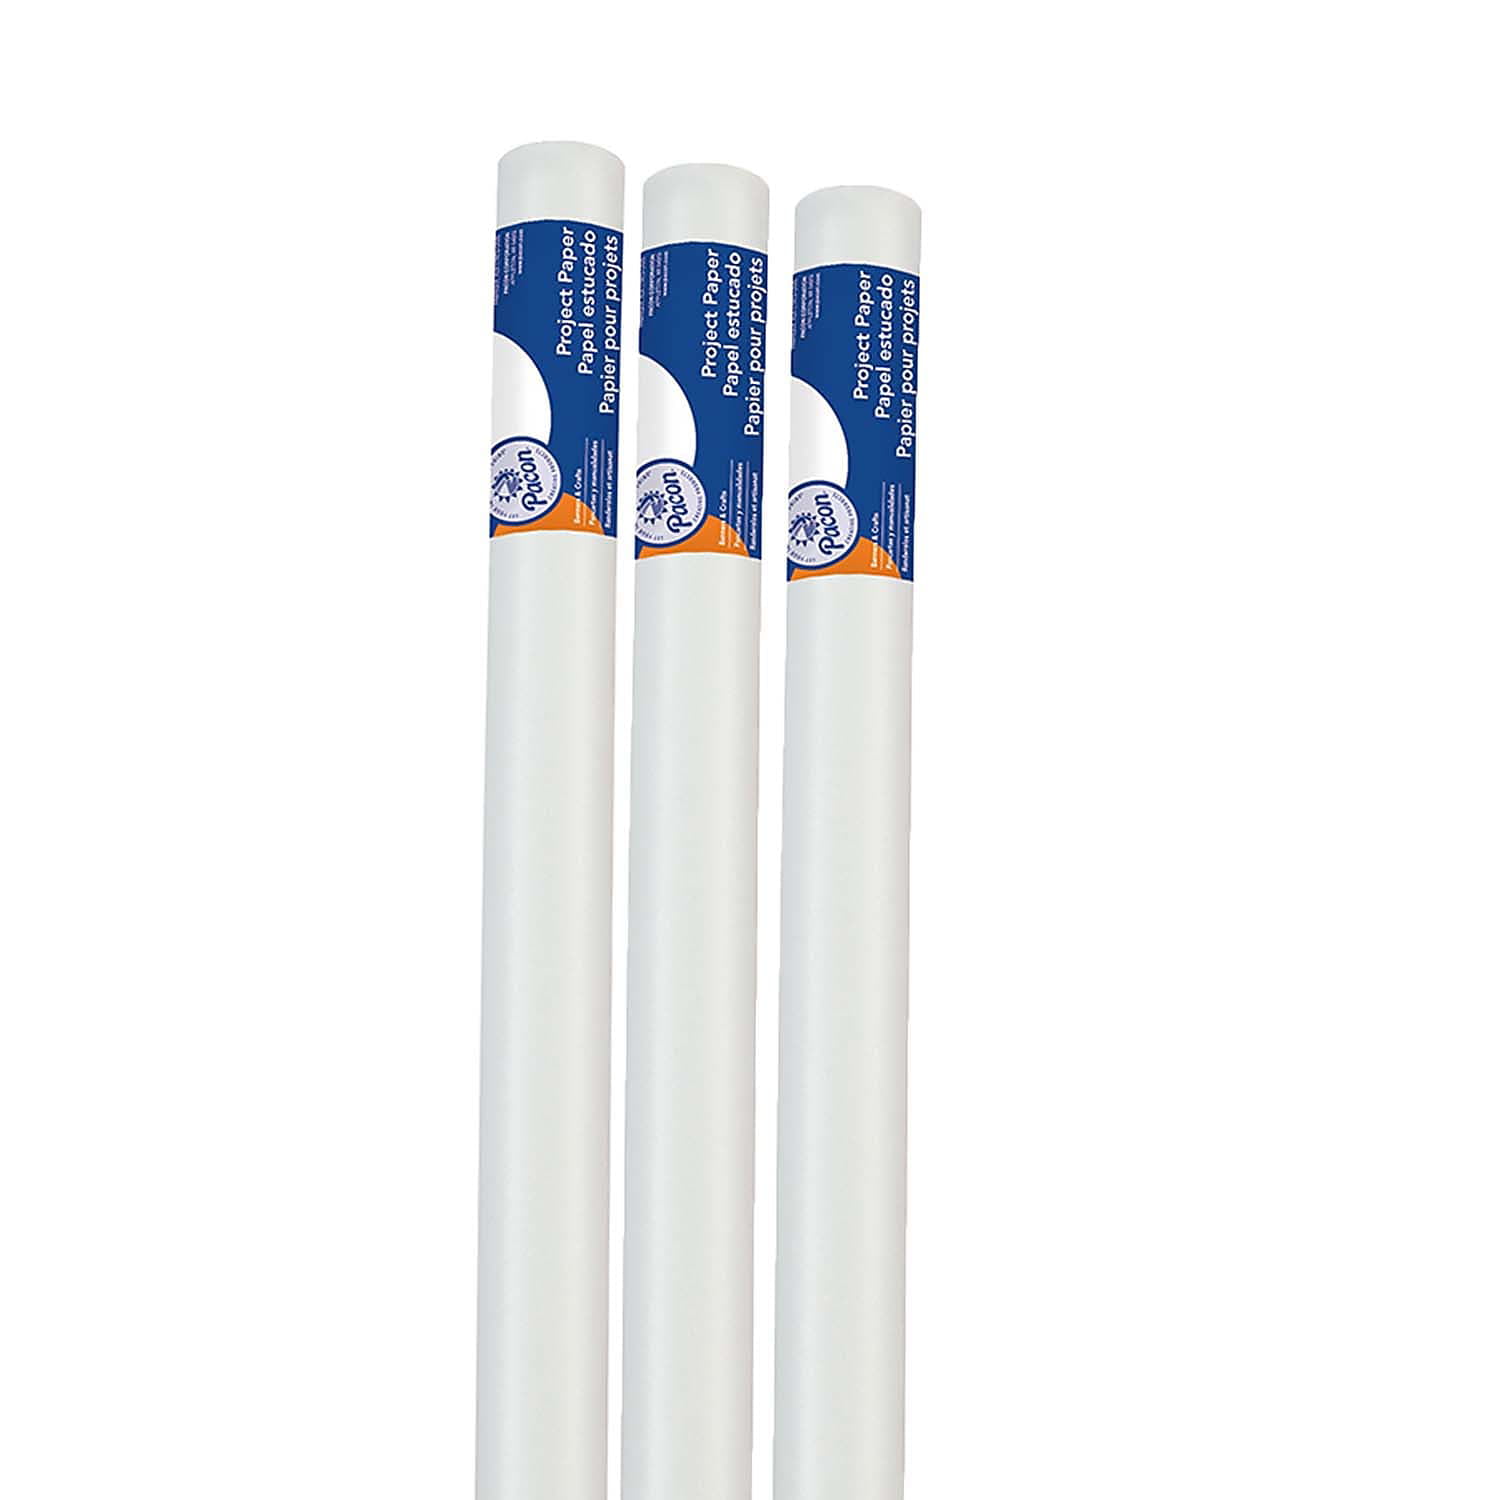 Pacon White Utility Paper Roll